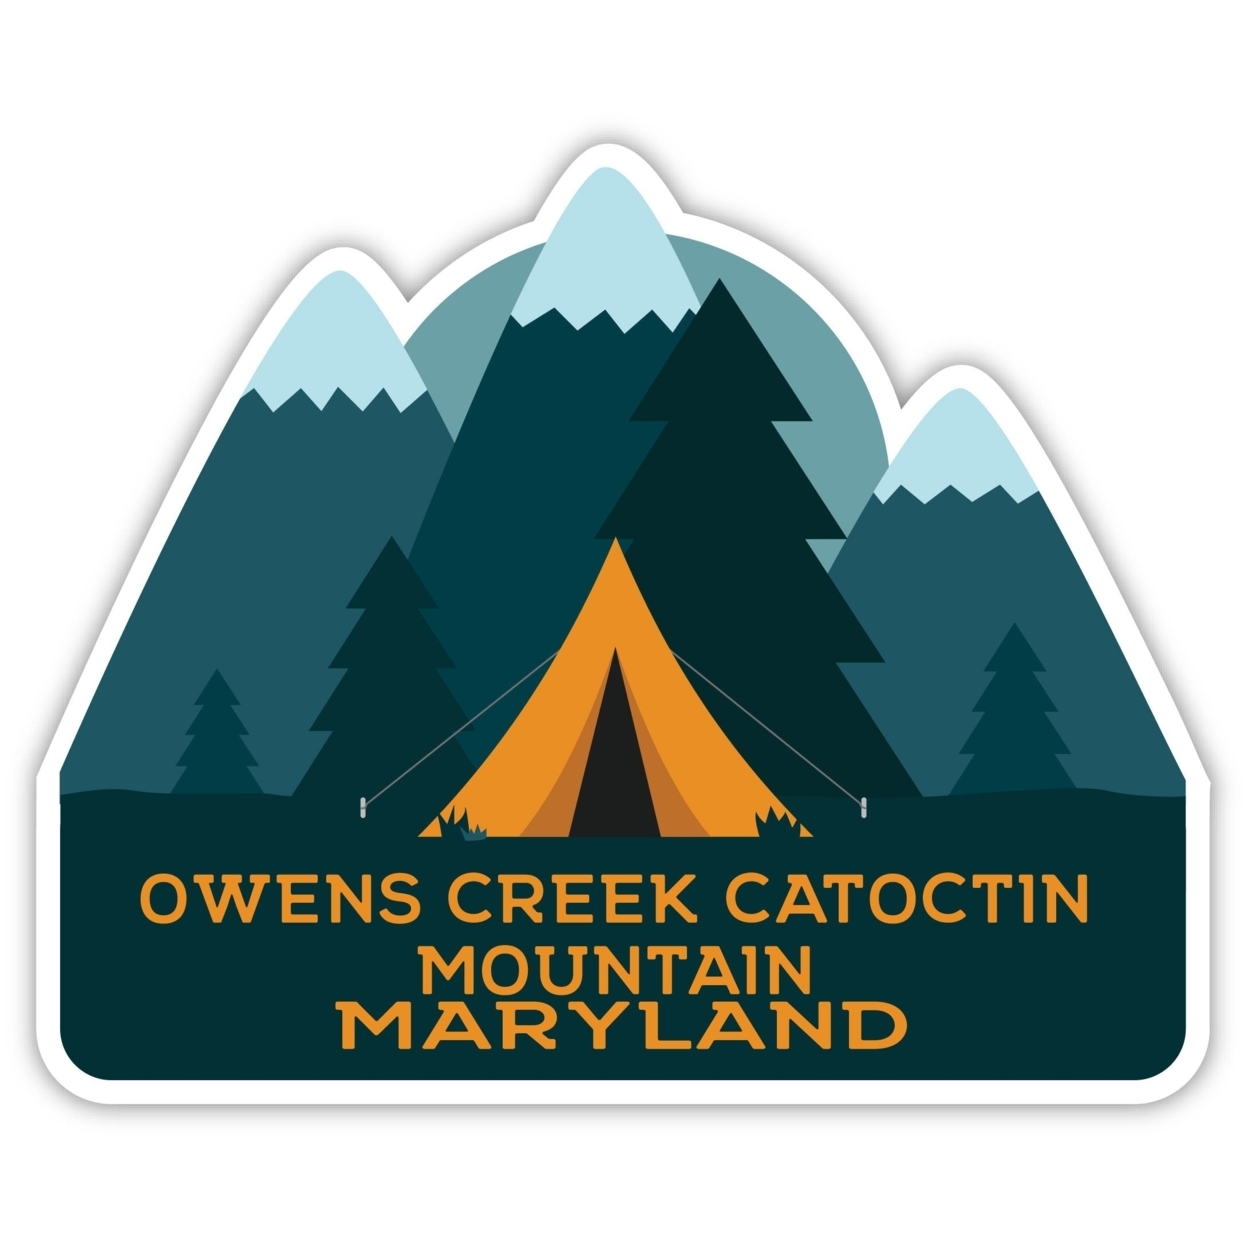 Owens Creek Catoctin Mountain Maryland Souvenir Decorative Stickers (Choose Theme And Size) - Single Unit, 2-Inch, Tent